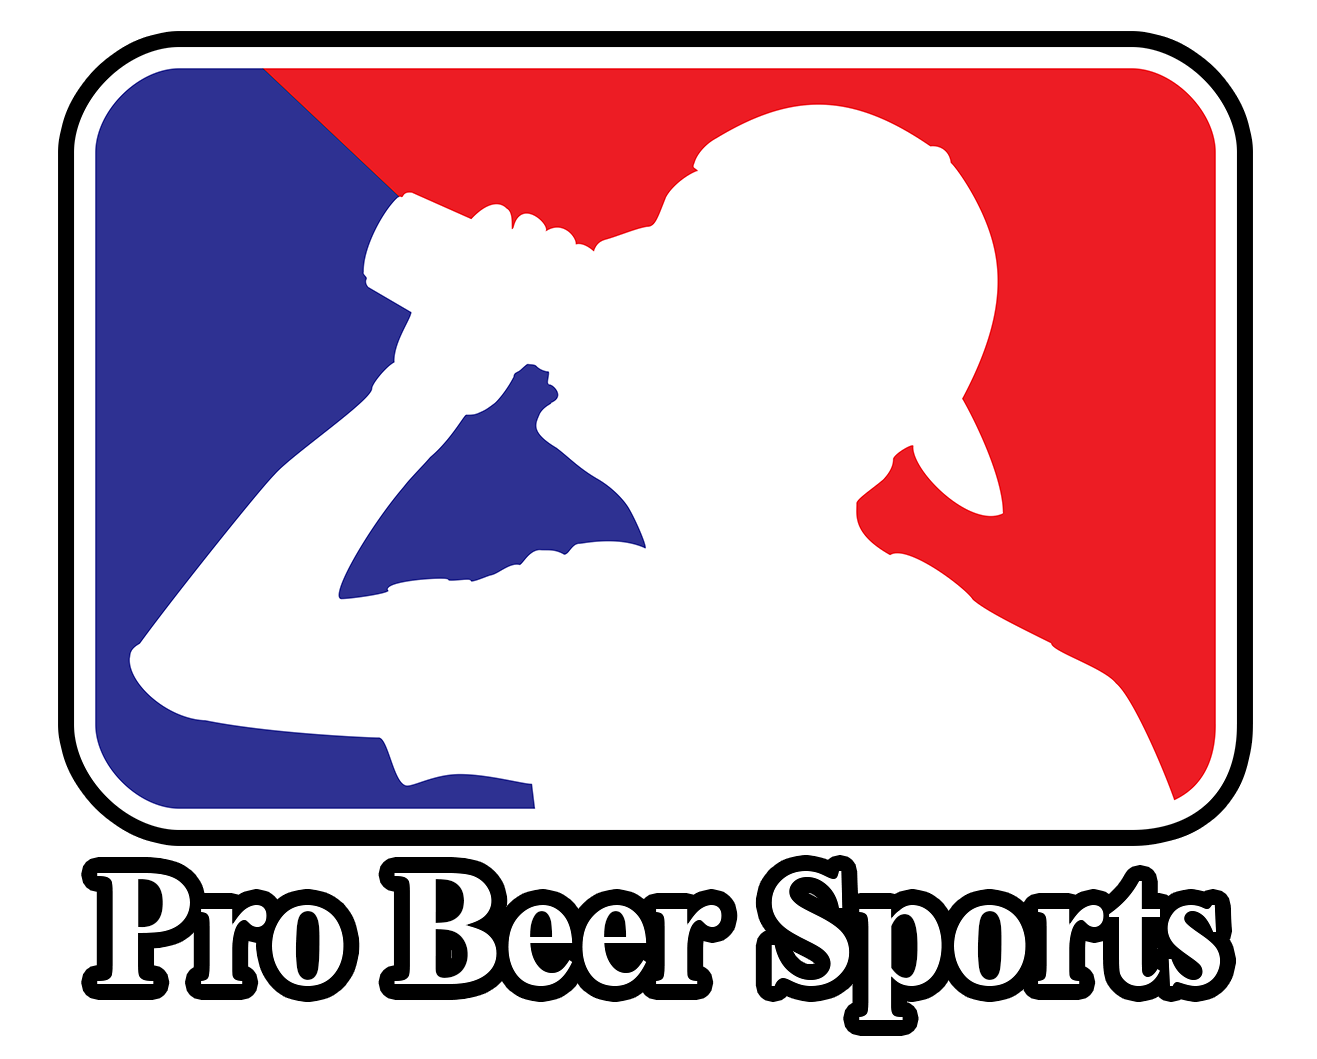 Pro Beer Sports